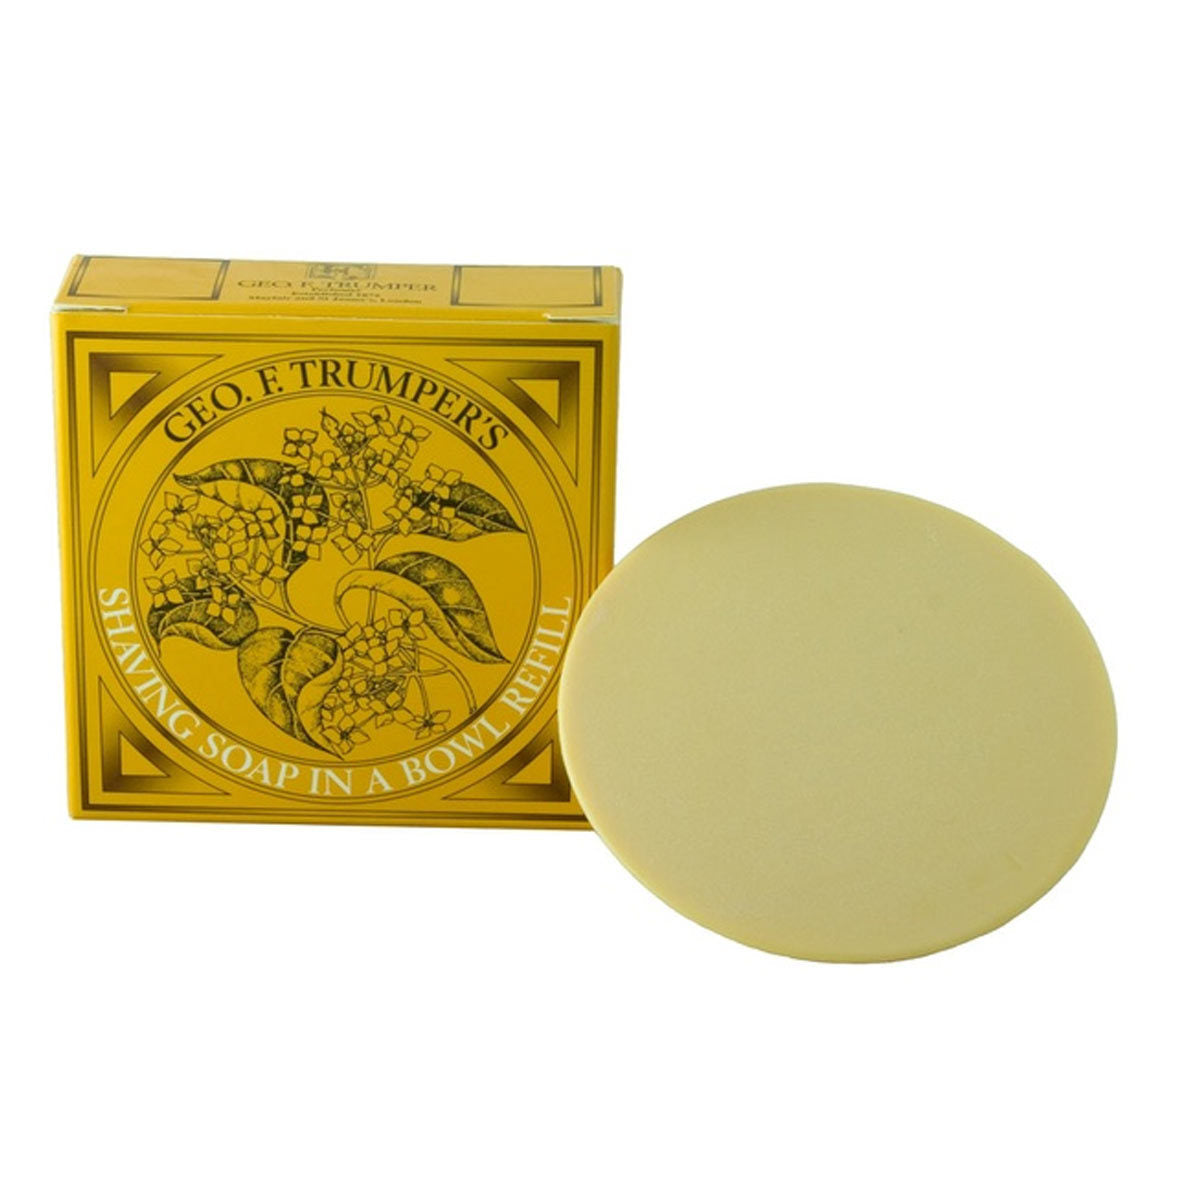 Primary image of Sandalwood Shave Soap Refill